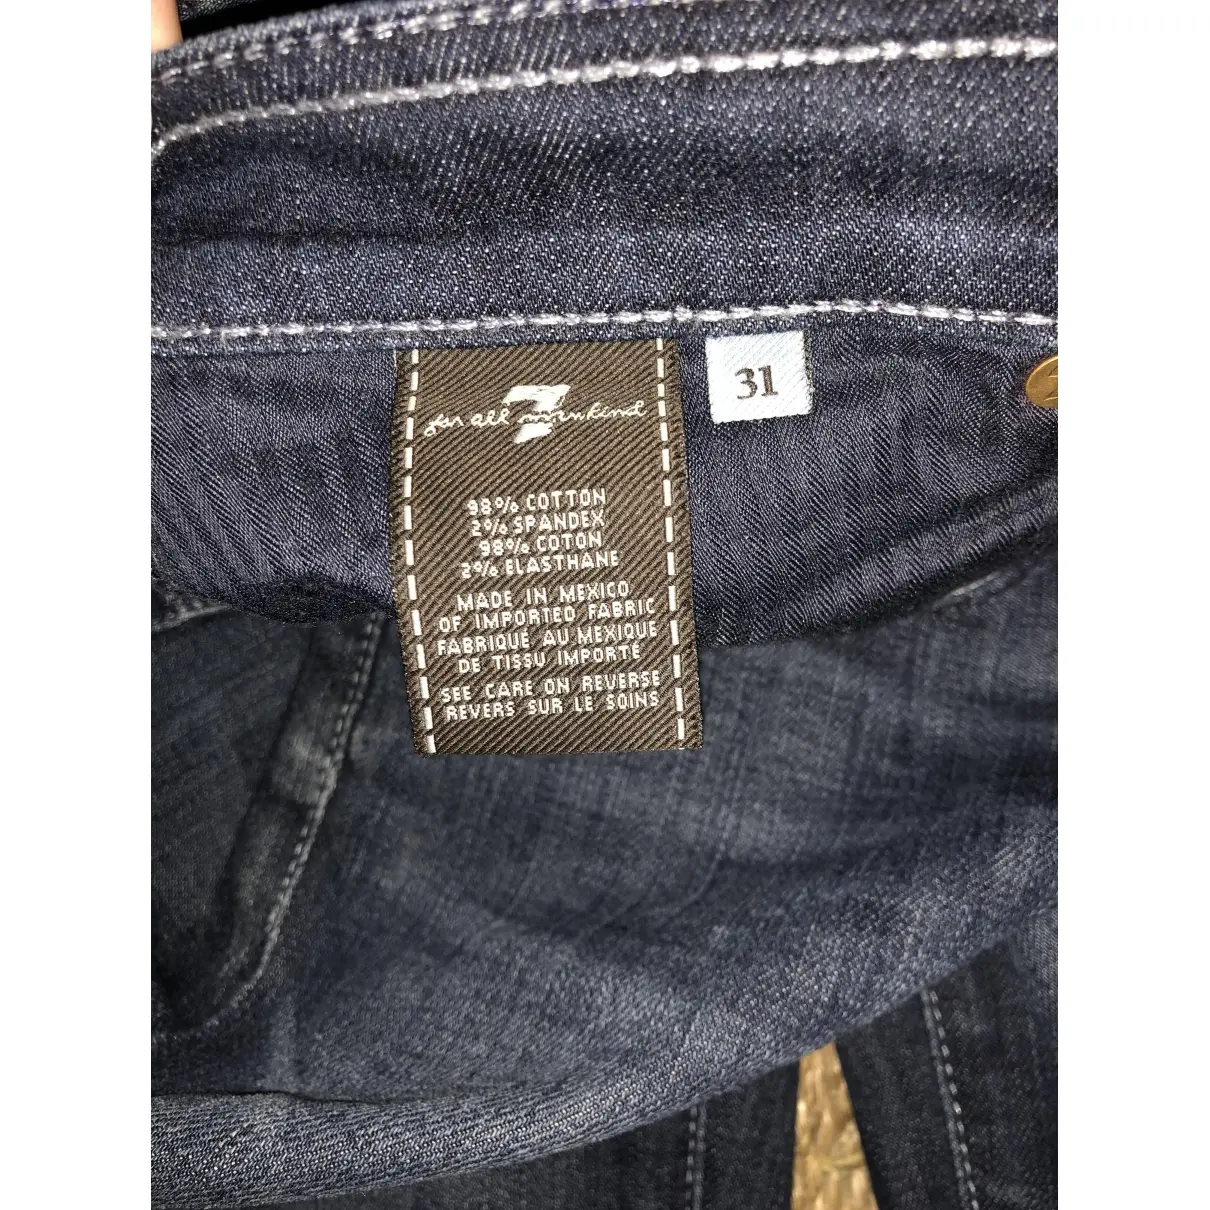 7 For All Mankind Bootcut jeans for sale